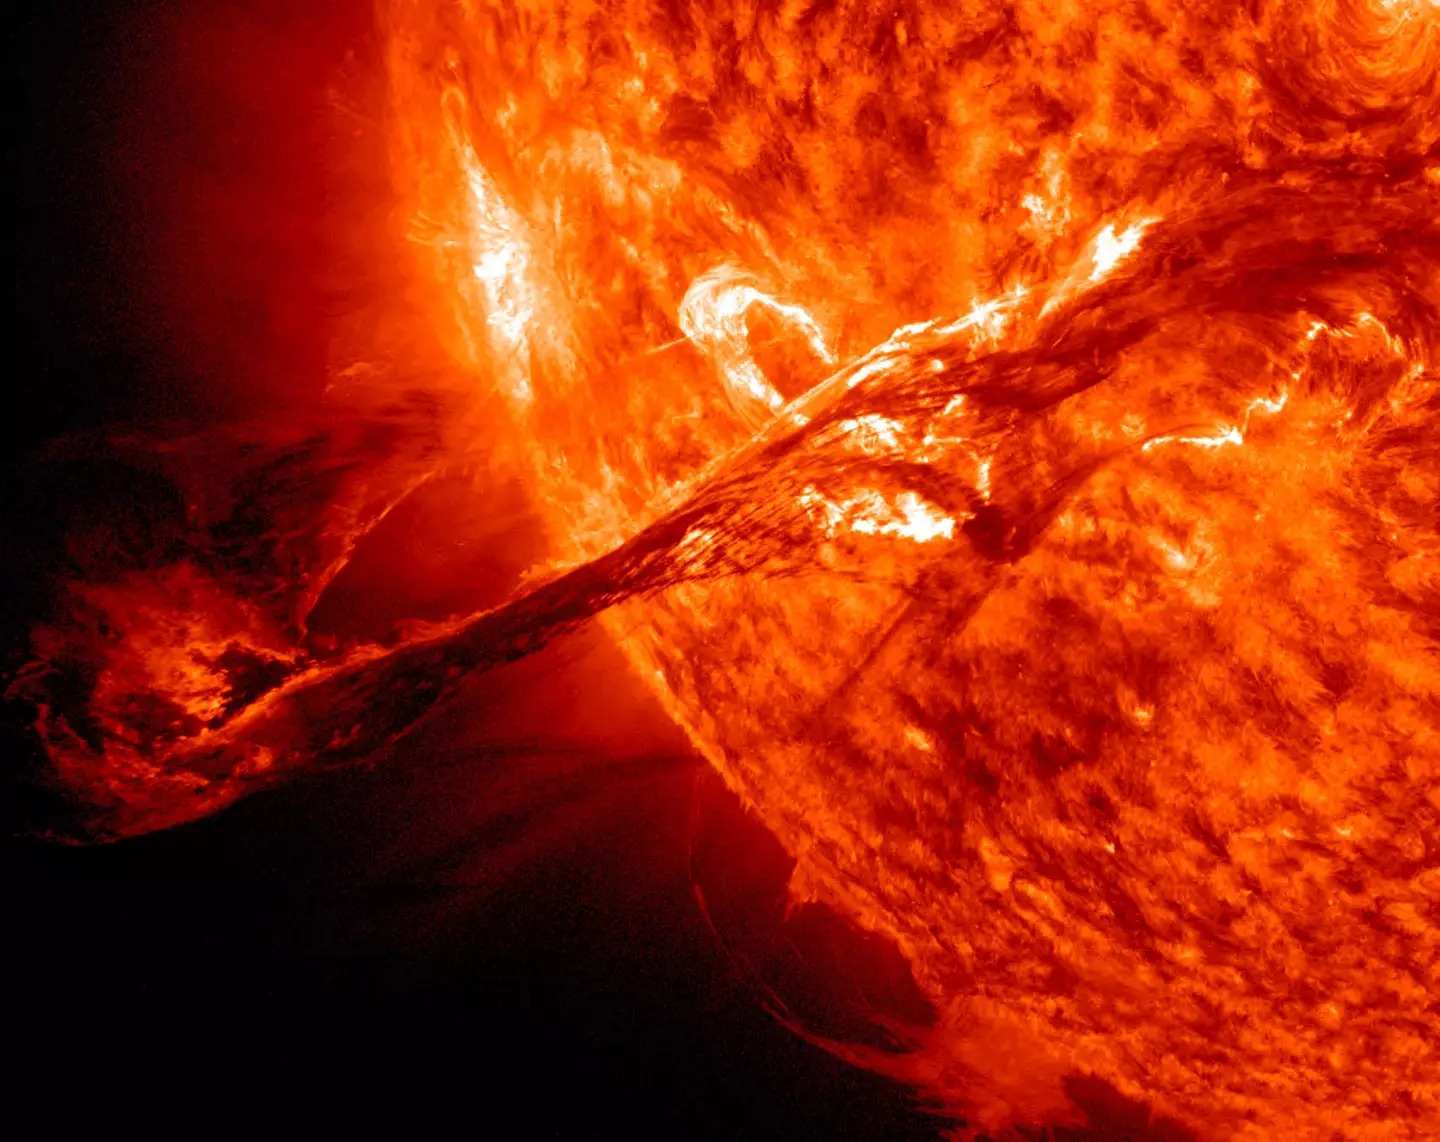 Here's an artists rendition of what causes these solar storms.